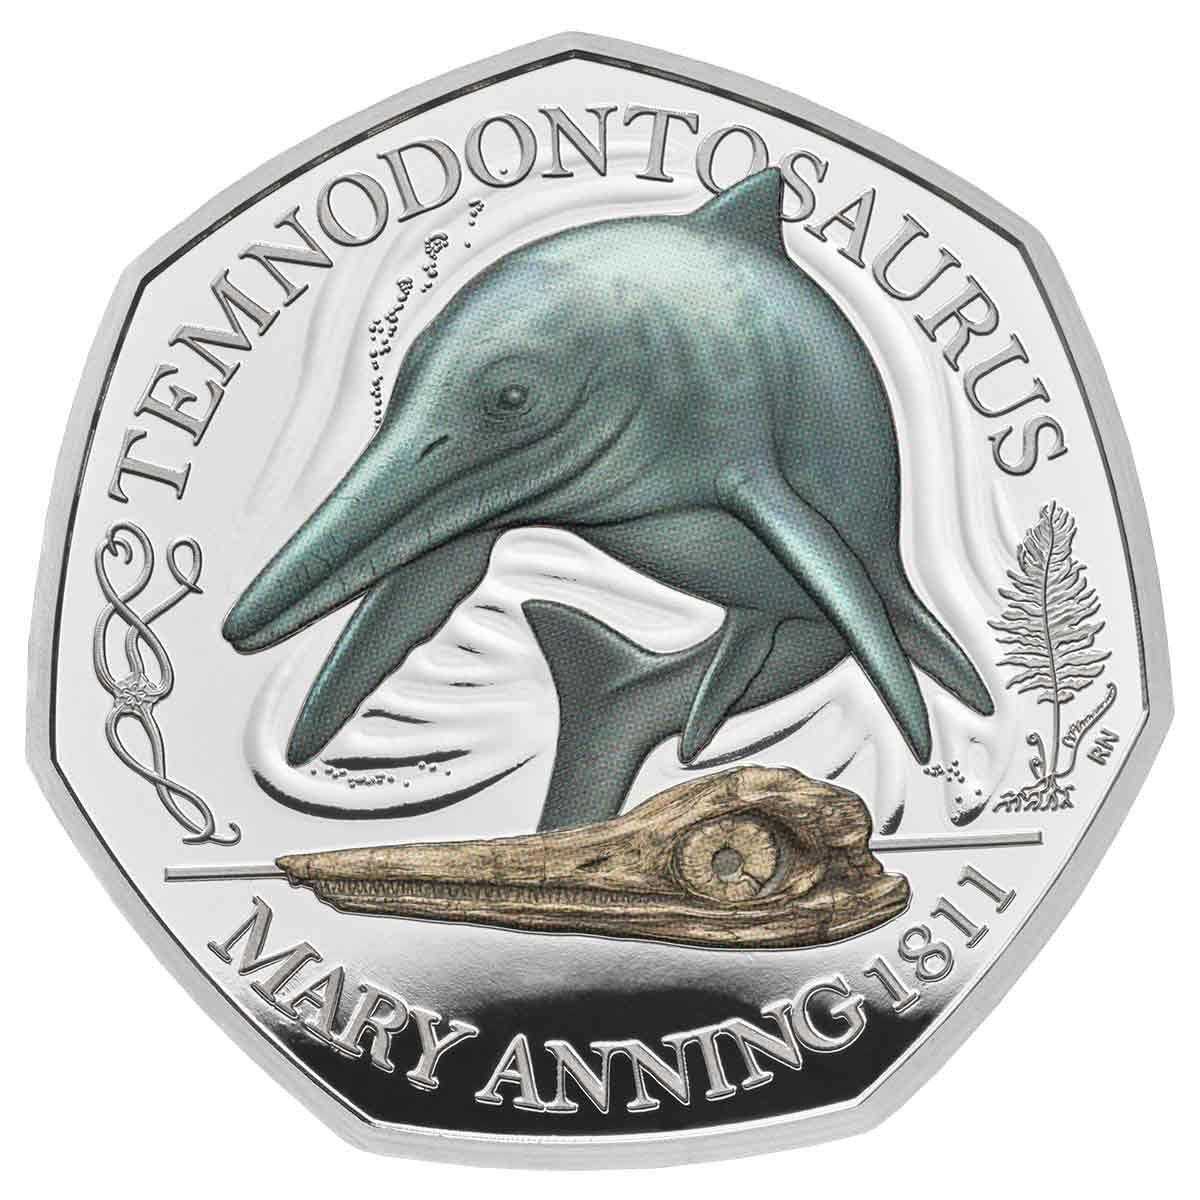 2021Temnodontosaurus 50p Coloured Silver Proof Coin